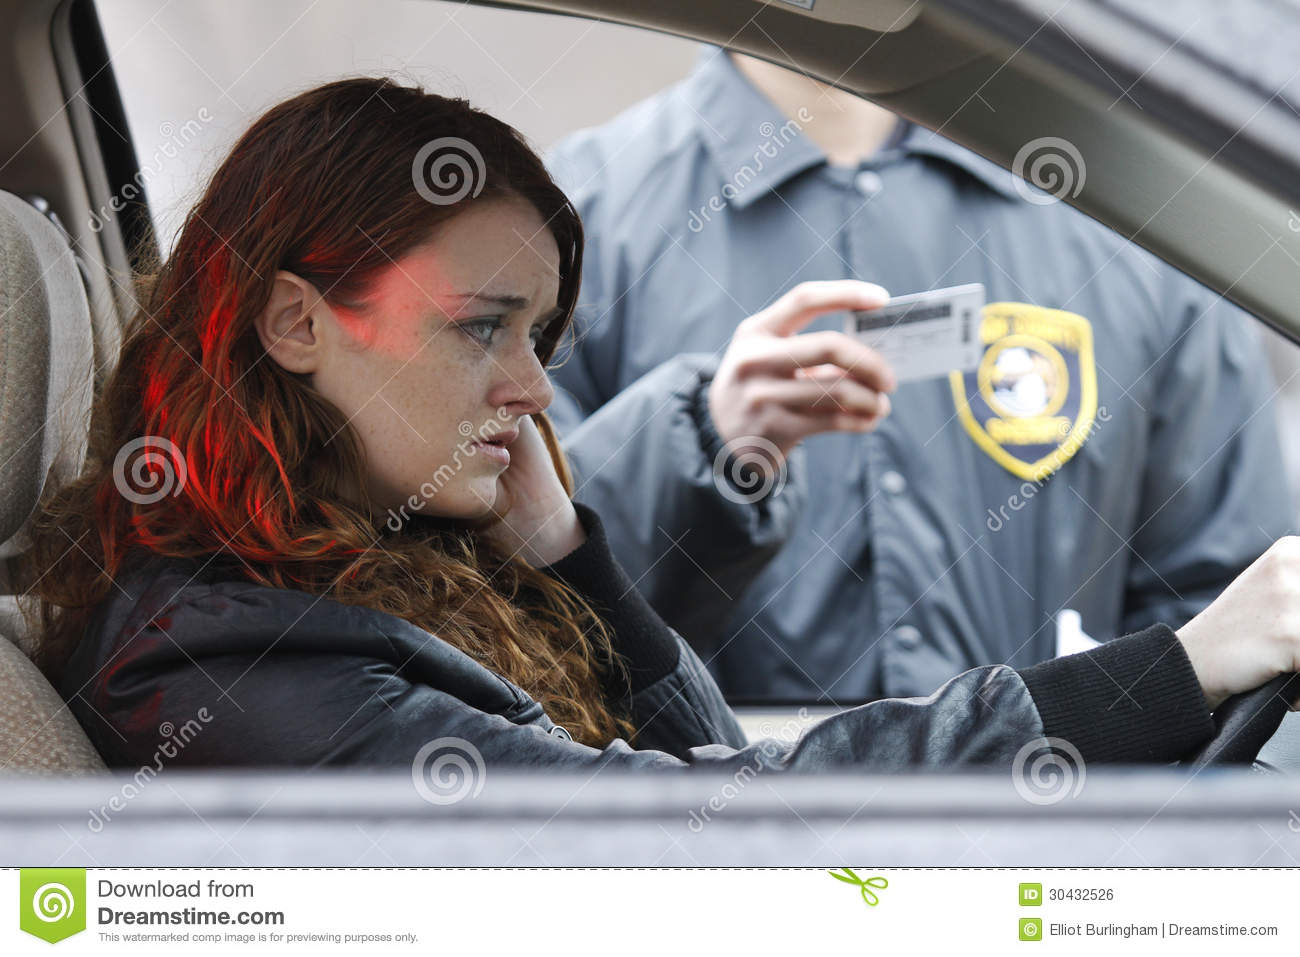 Teen Girl Pulled Over By Police Royalty Free Stock Image   Image